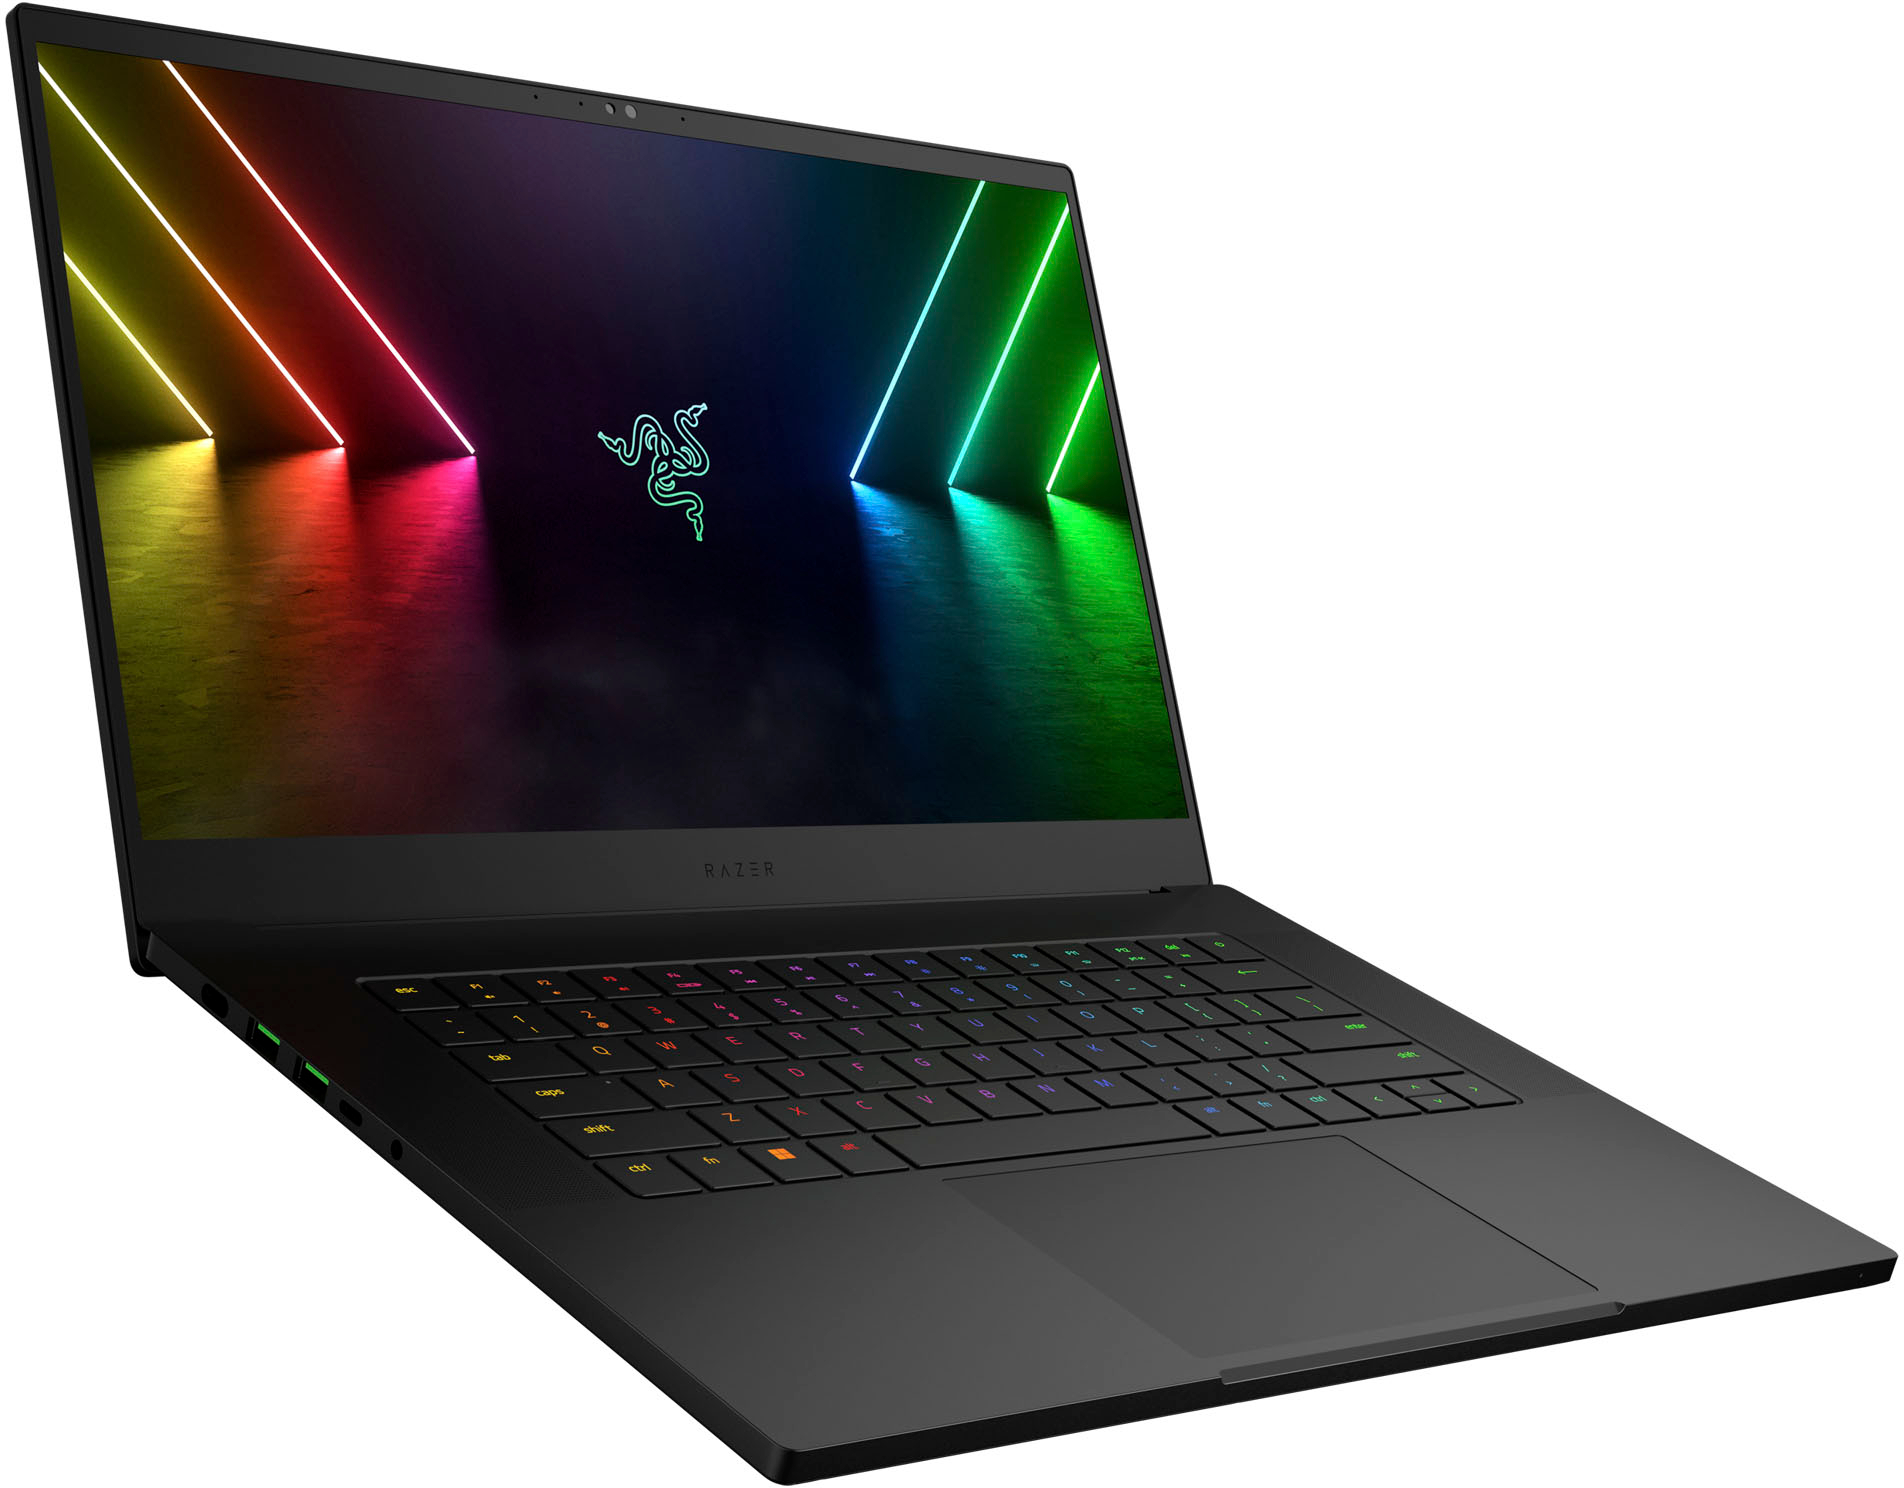 Razer Blade 15 review: A real treat if you've got the cash